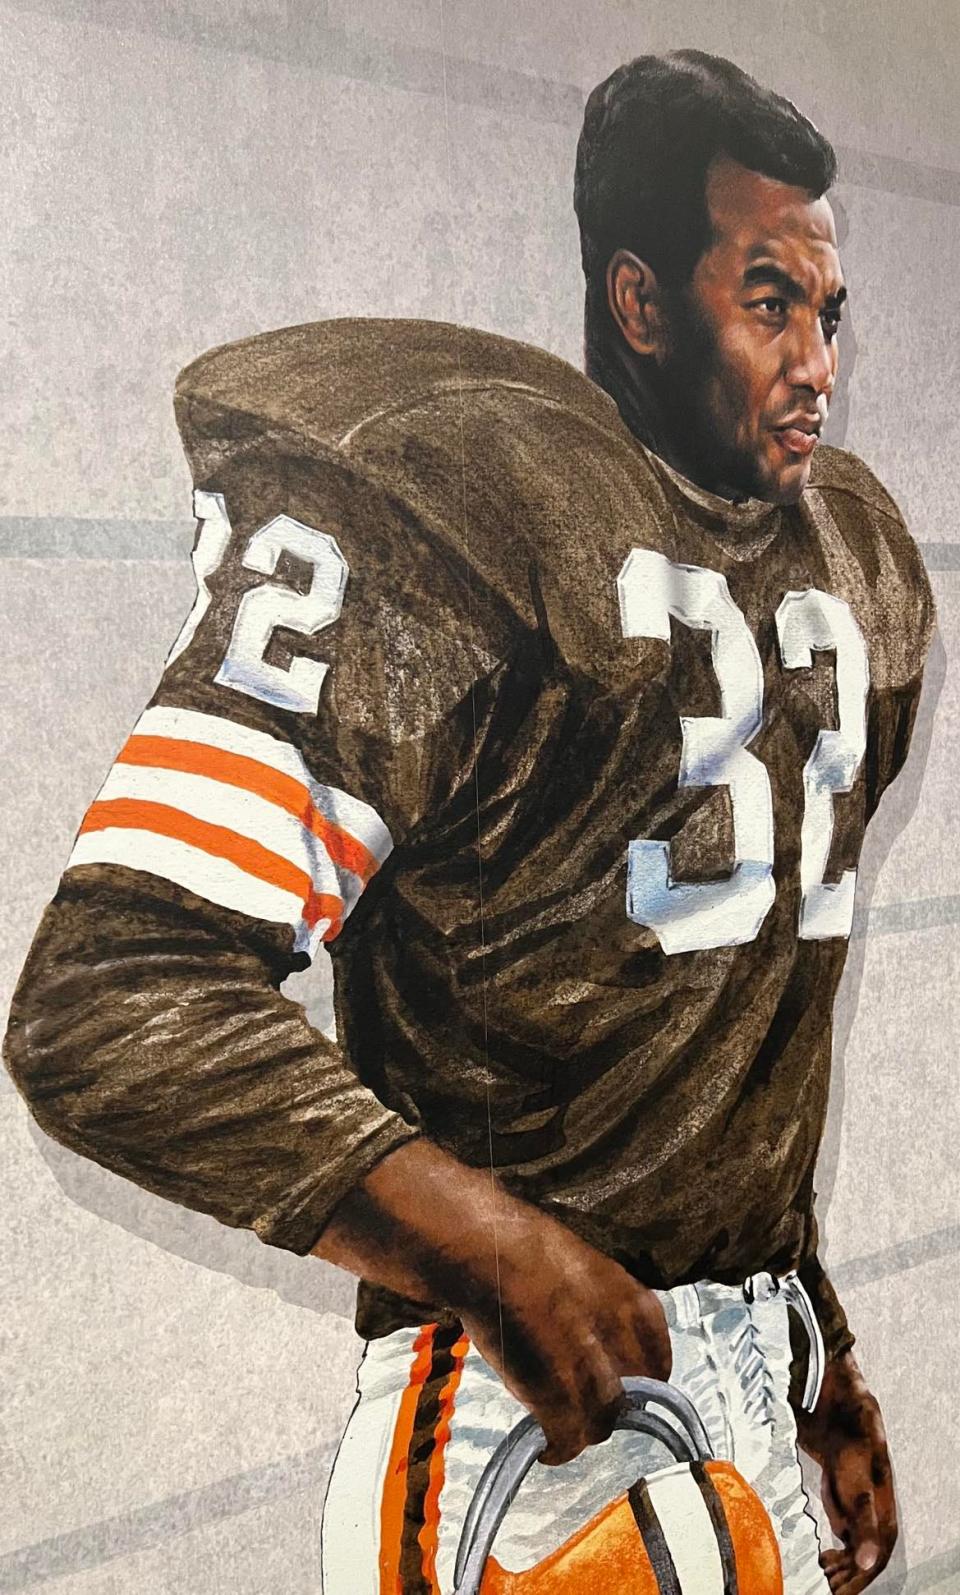 Football fans can learn about the lore and career of the late Cleveland Browns legend Jim Brown at the Pro Football Hall of Fame.